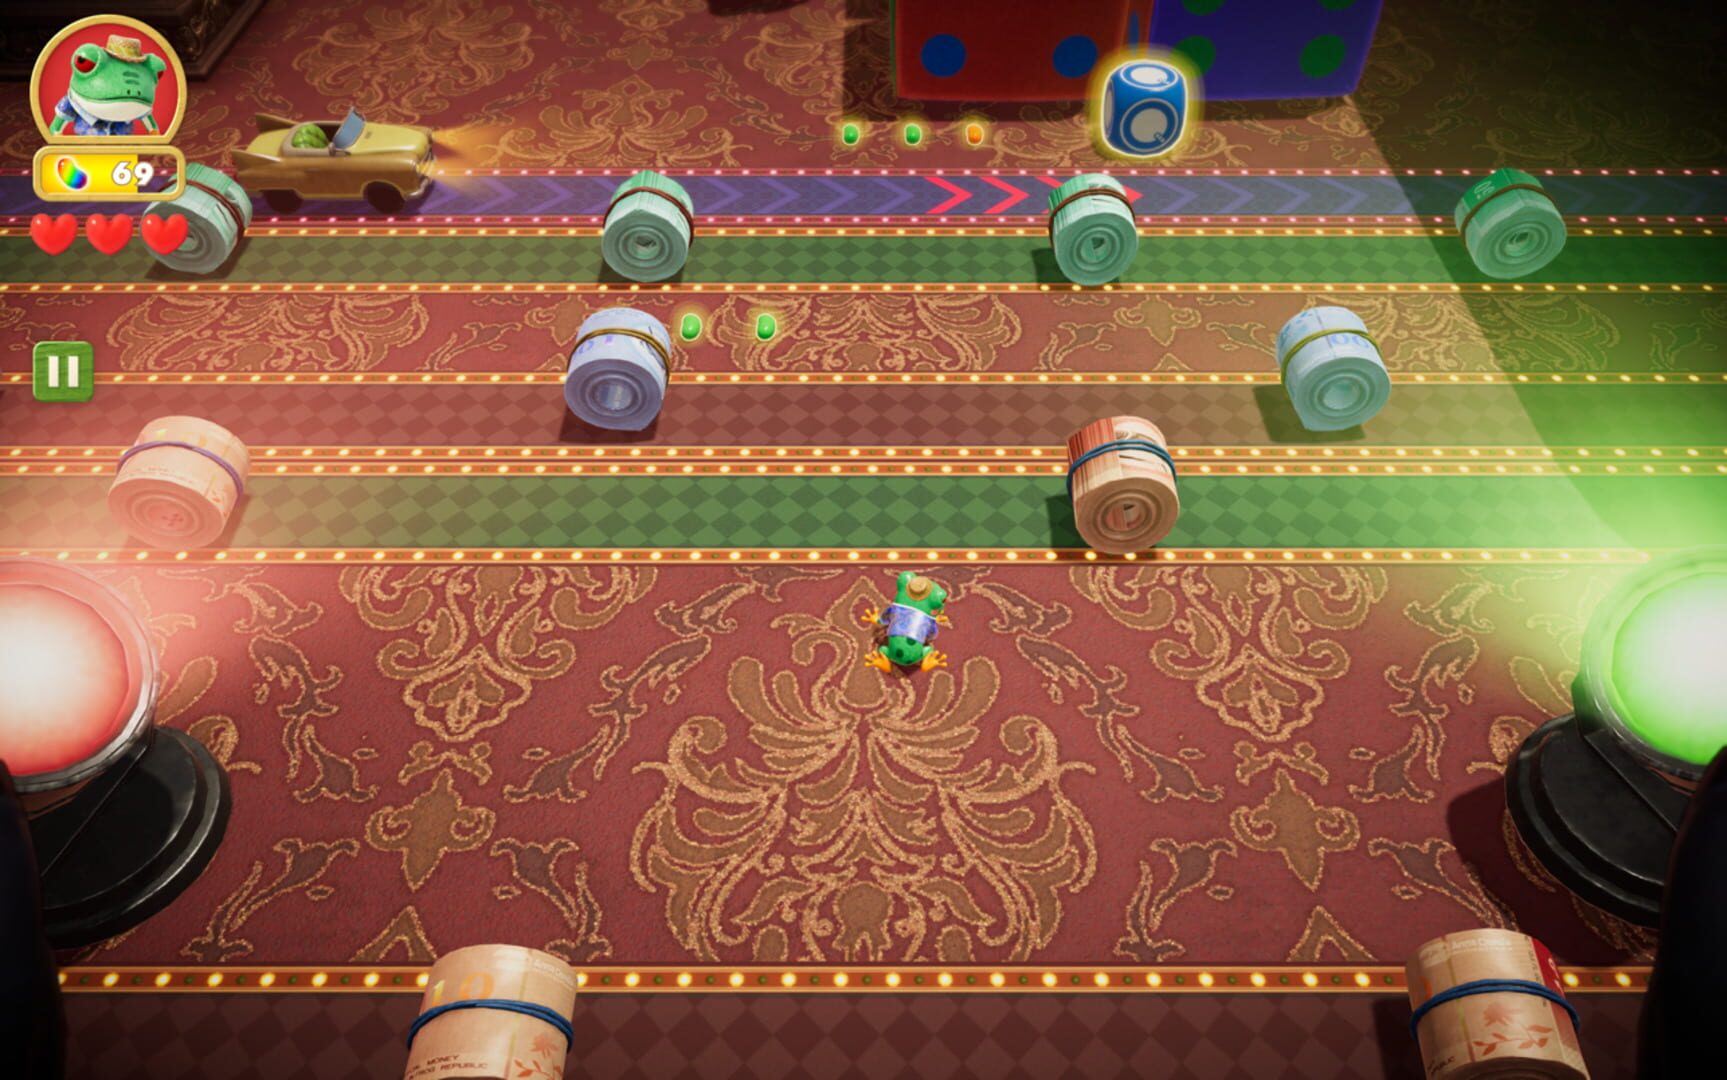 Frogger in Toy Town screenshots